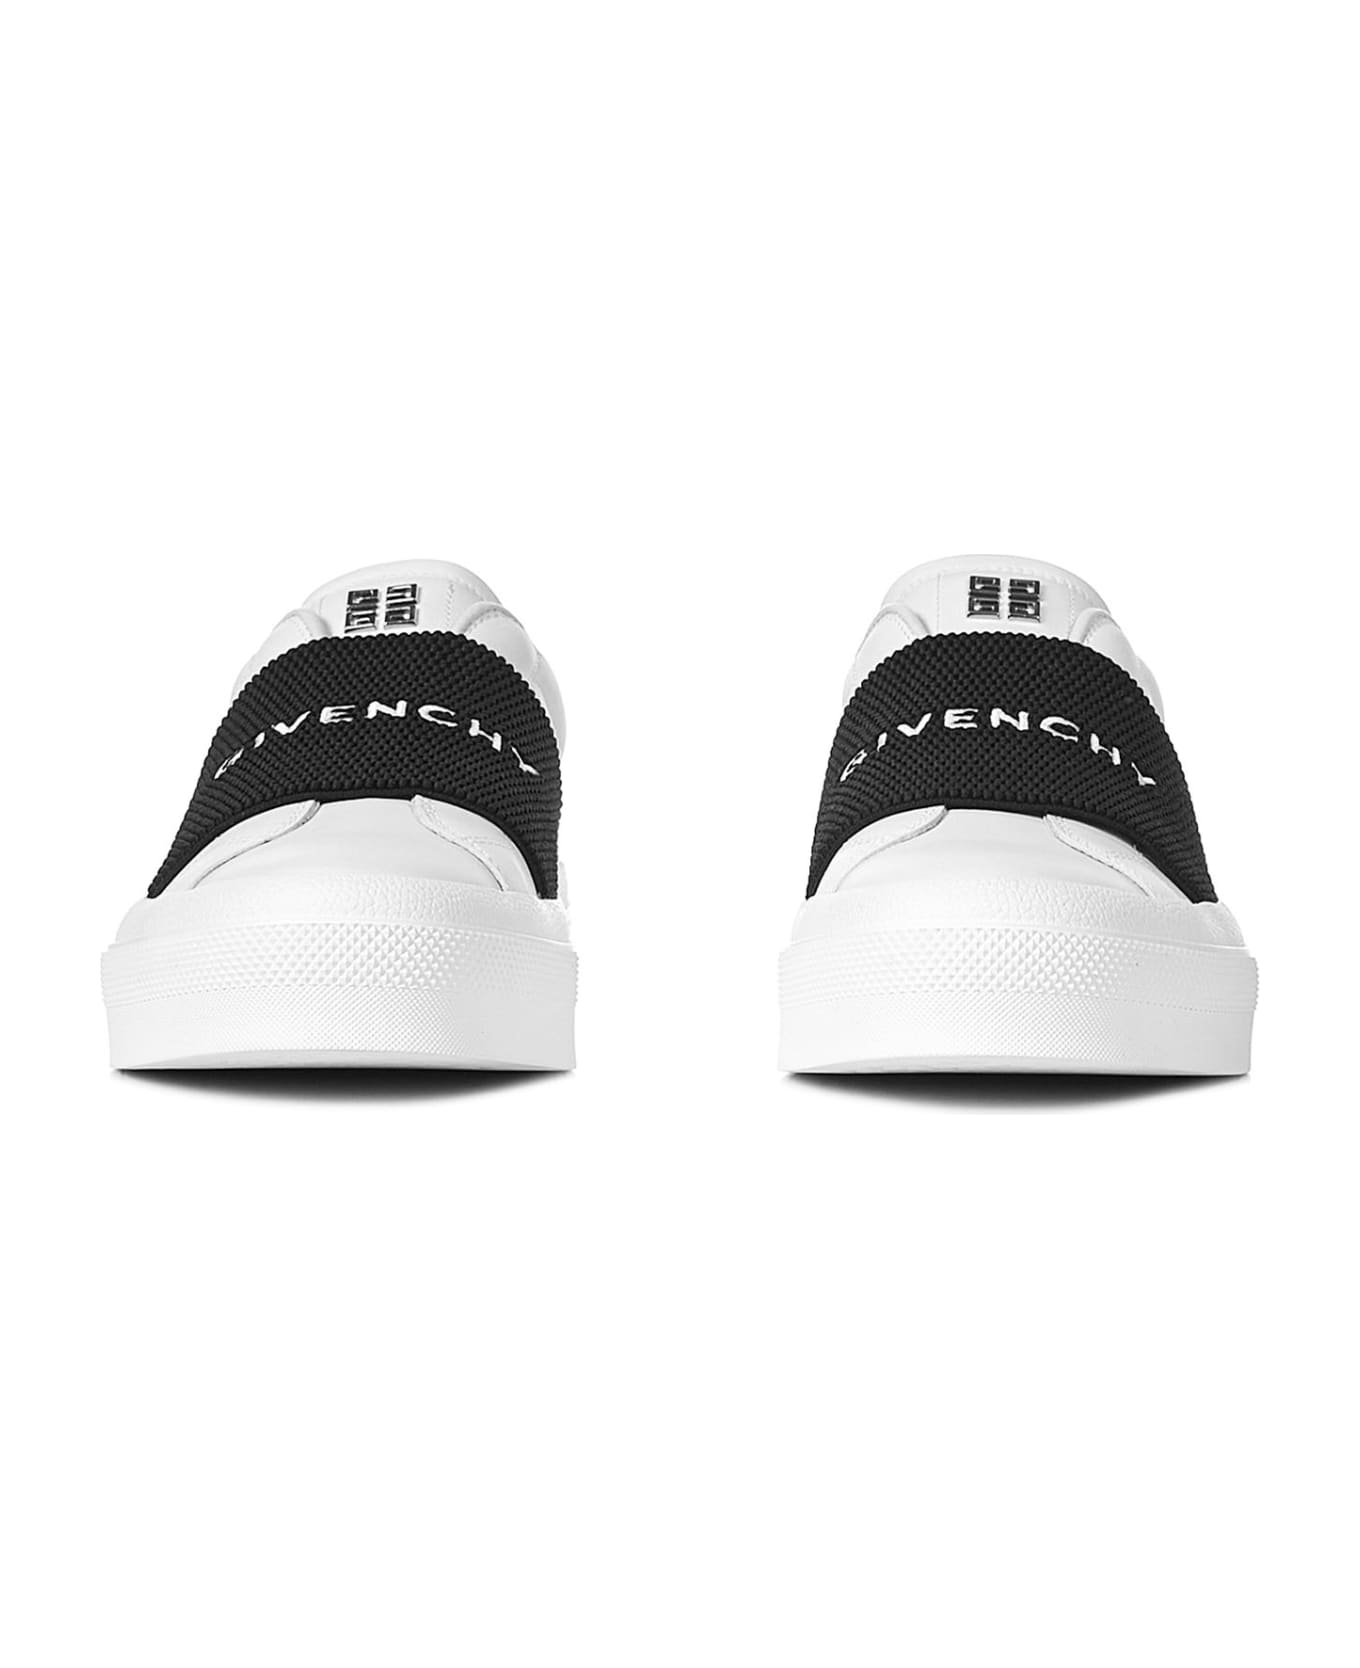 Givenchy City Court Sneakers - White